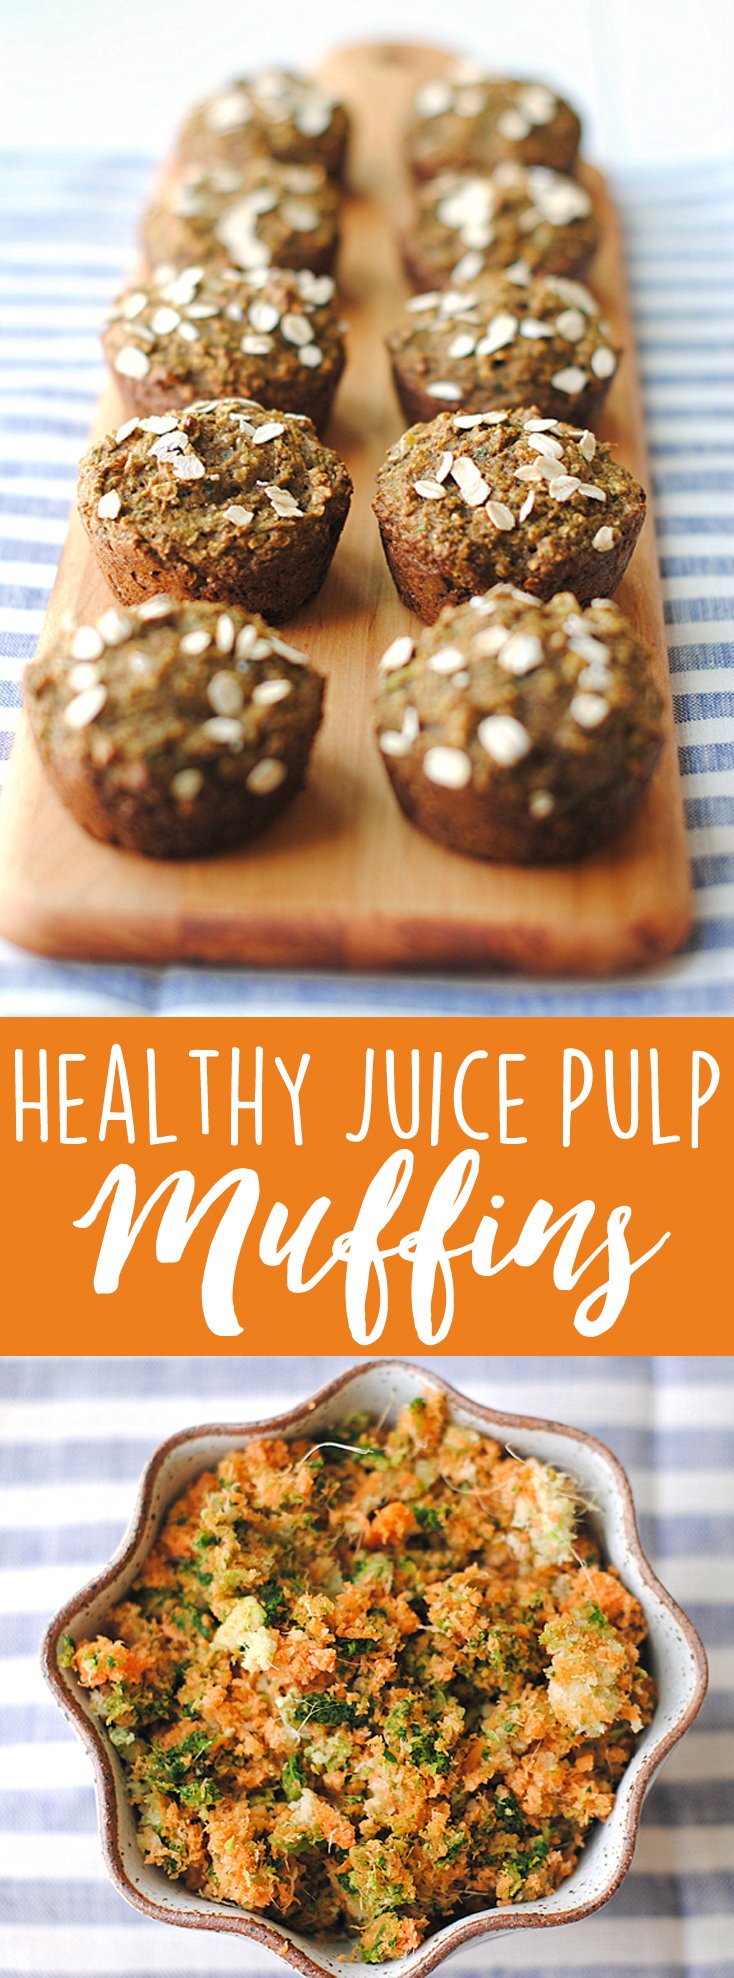 Use all that delicious leftover pulp in these Healthy Juice Pulp Muffins! | Eat Yourself Skinny